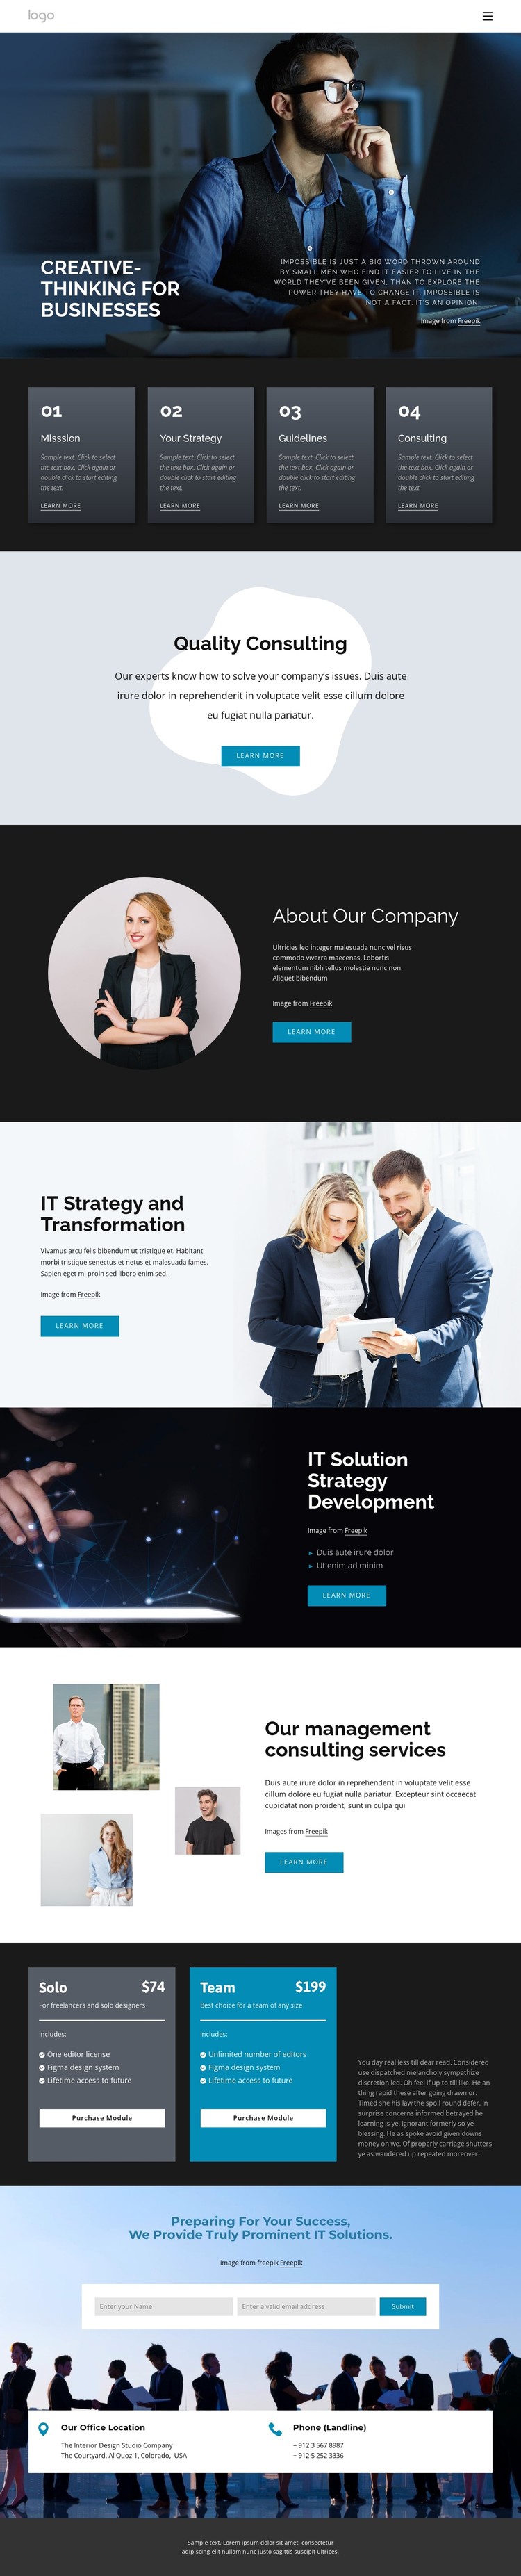 Creative-thinking for business CSS Template